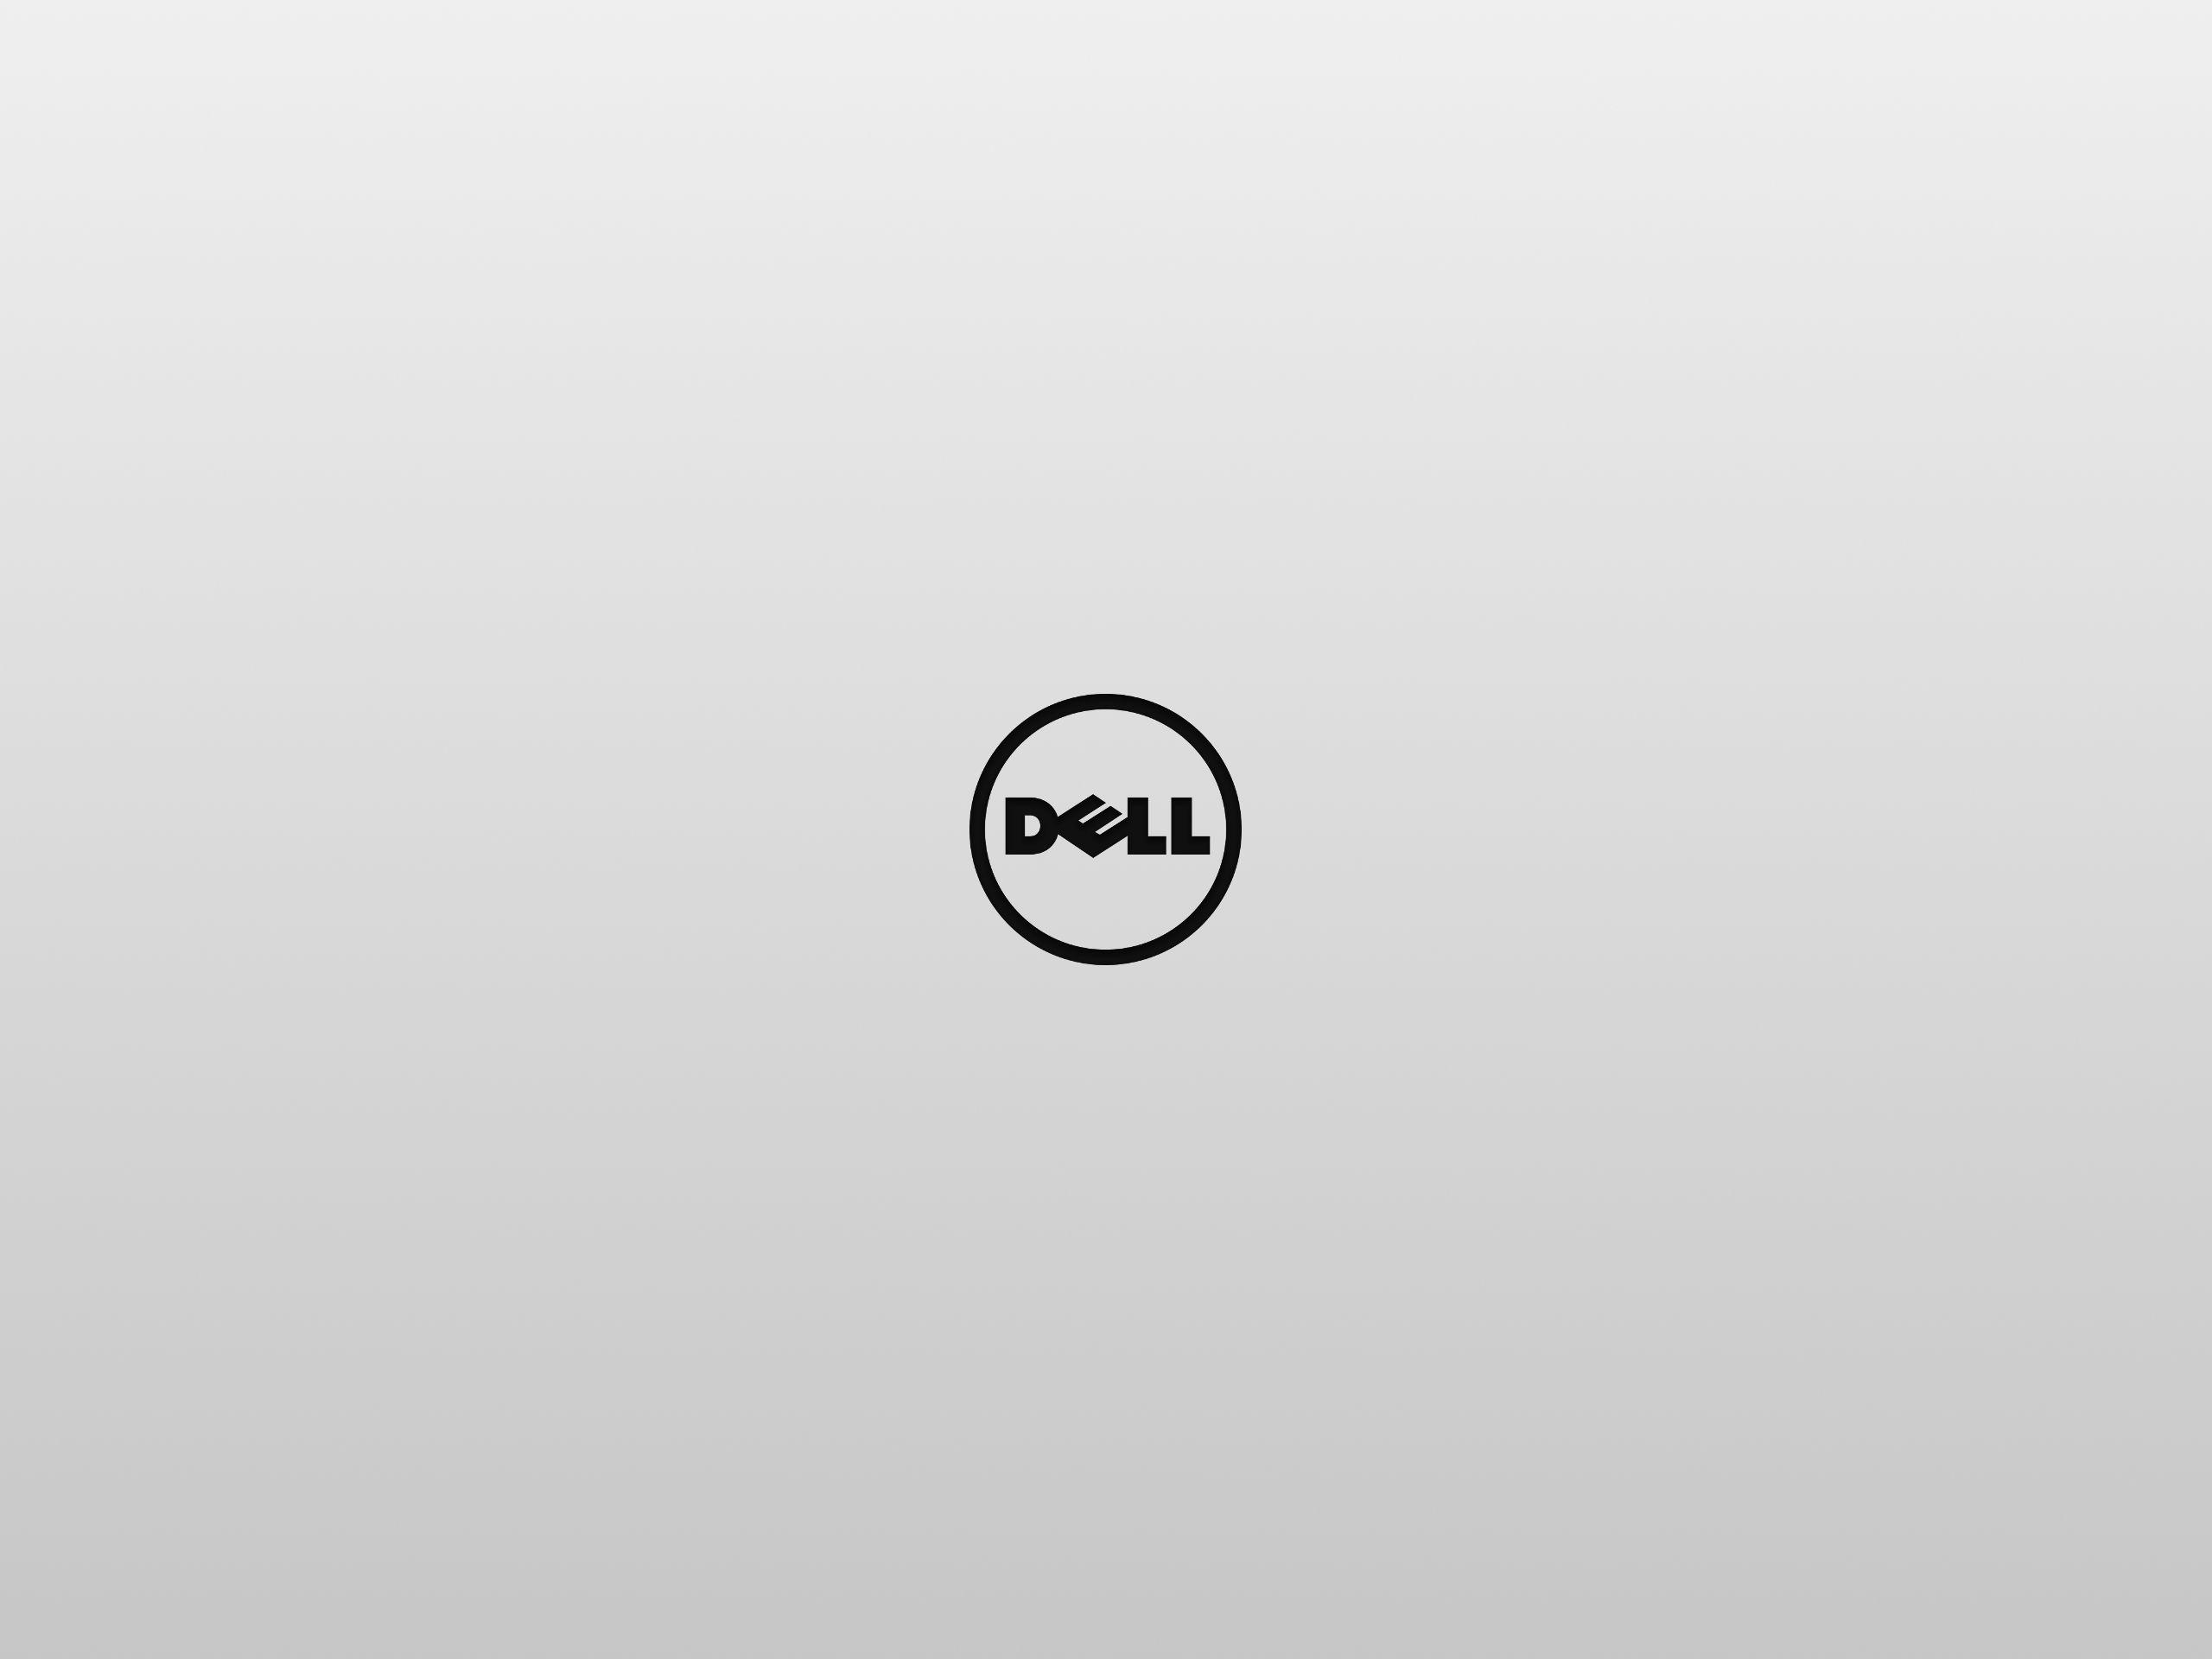 Dell laptop Stock Photos, Royalty Free Dell laptop Images | Depositphotos